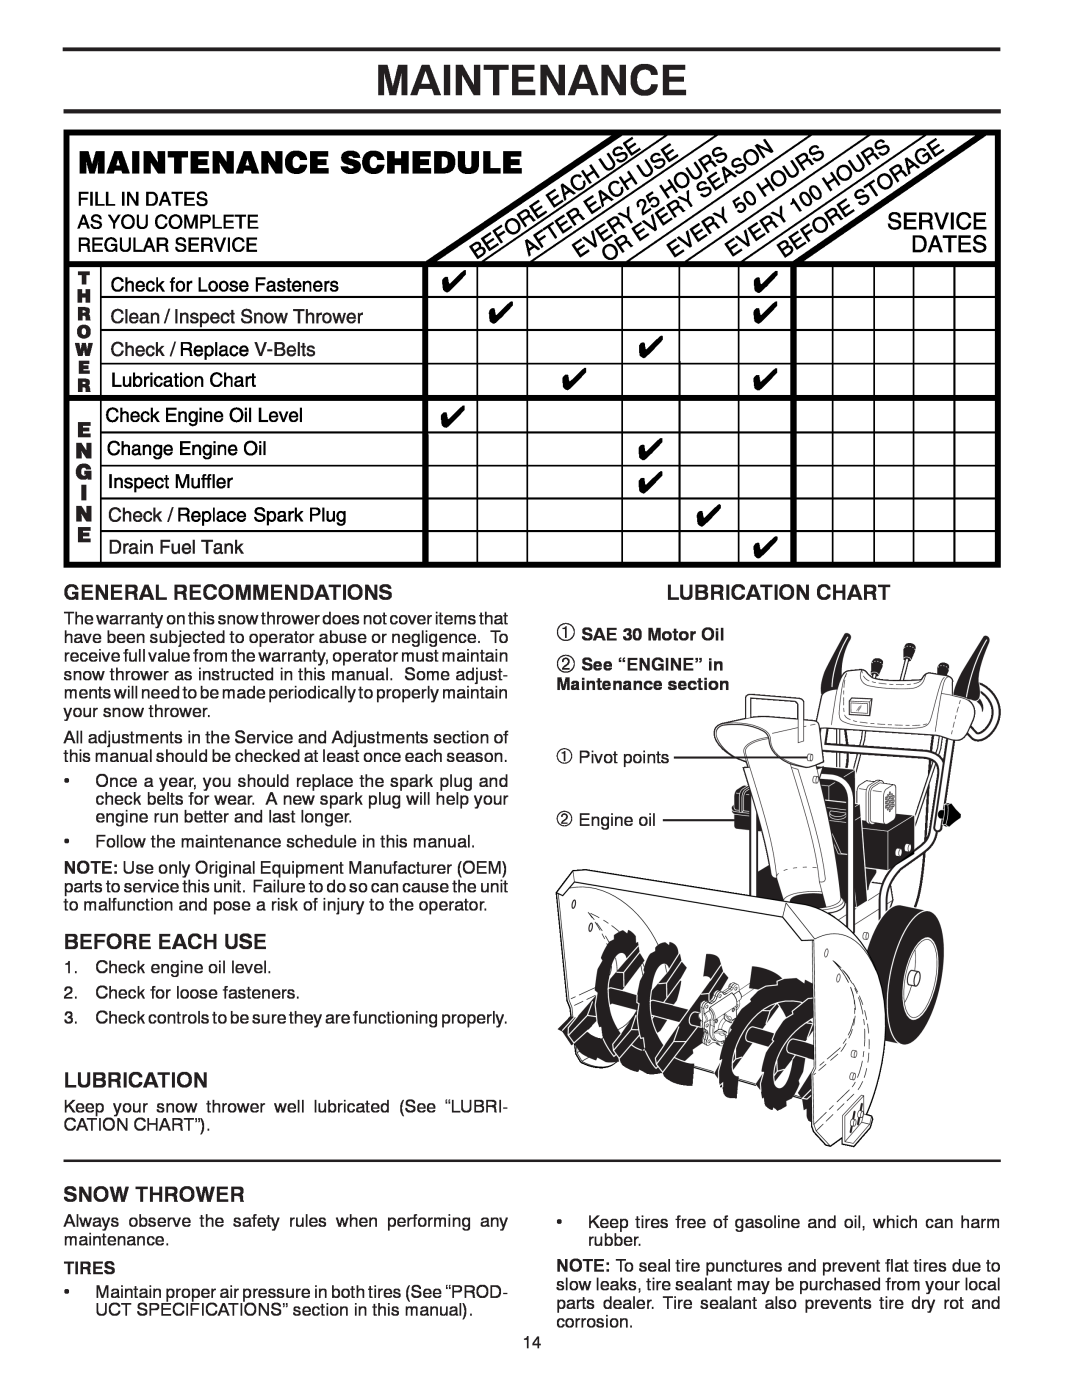 Poulan 185143 Maintenance, General Recommendations, Before Each Use, Snow Thrower, Lubrication Chart, Tires 